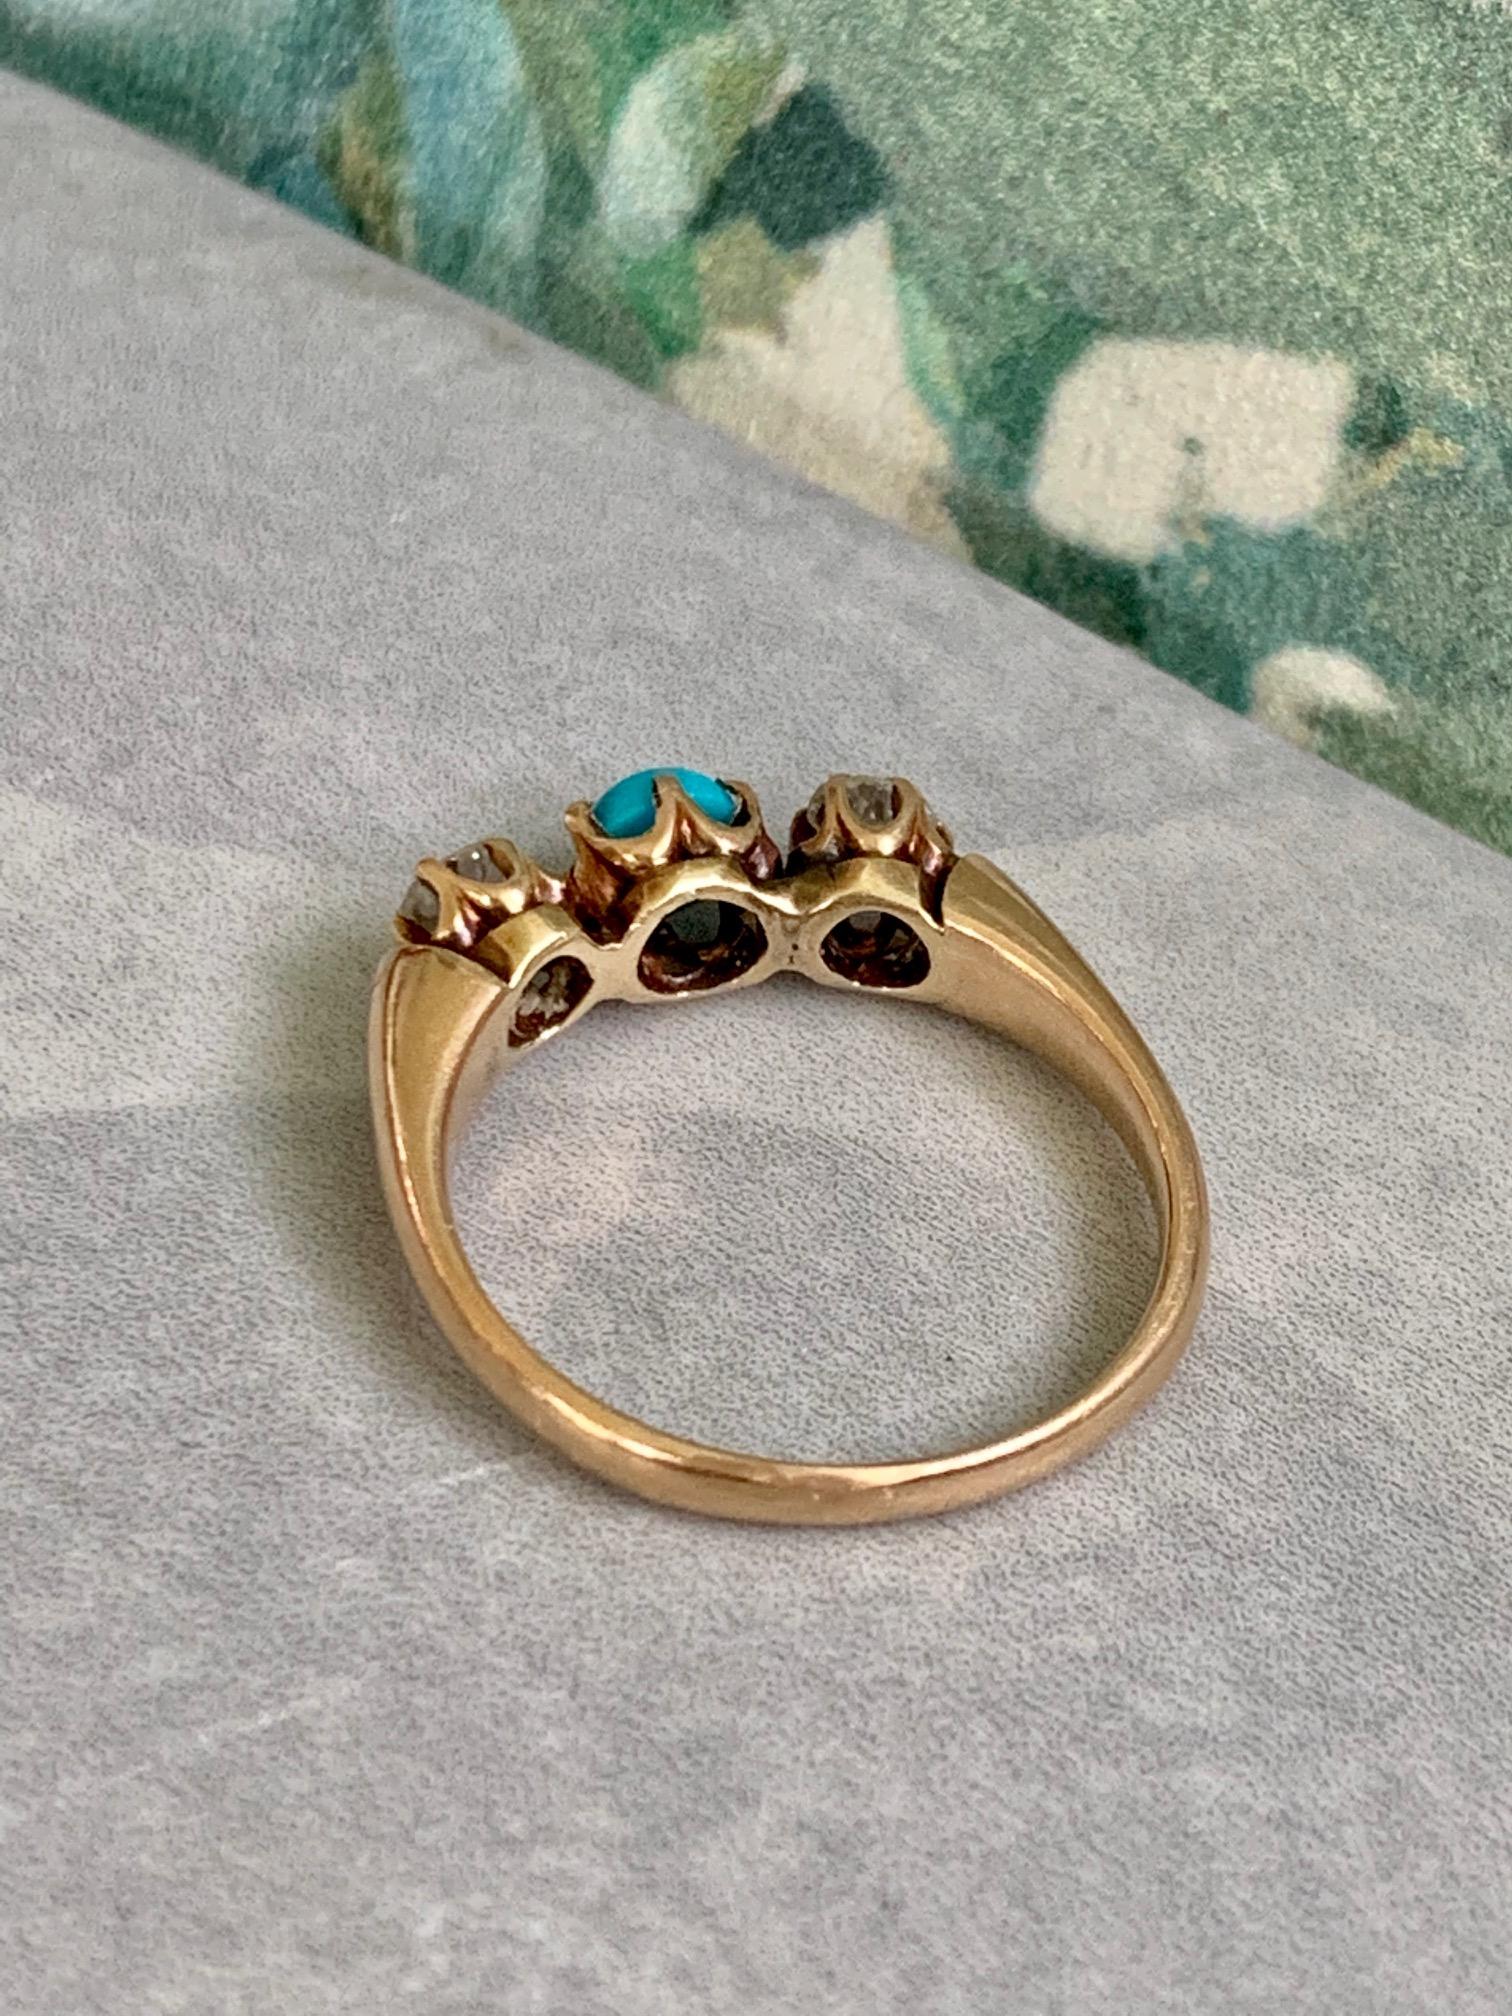 This lovely Victorian Turquoise and Diamond 14 karat yellow Gold ring features two old mine cut Diamonds, set on each side of the Turquoise stone in the center of the ring.  Each Diamond measures approximately 4.2mm each.  They are approximately .35